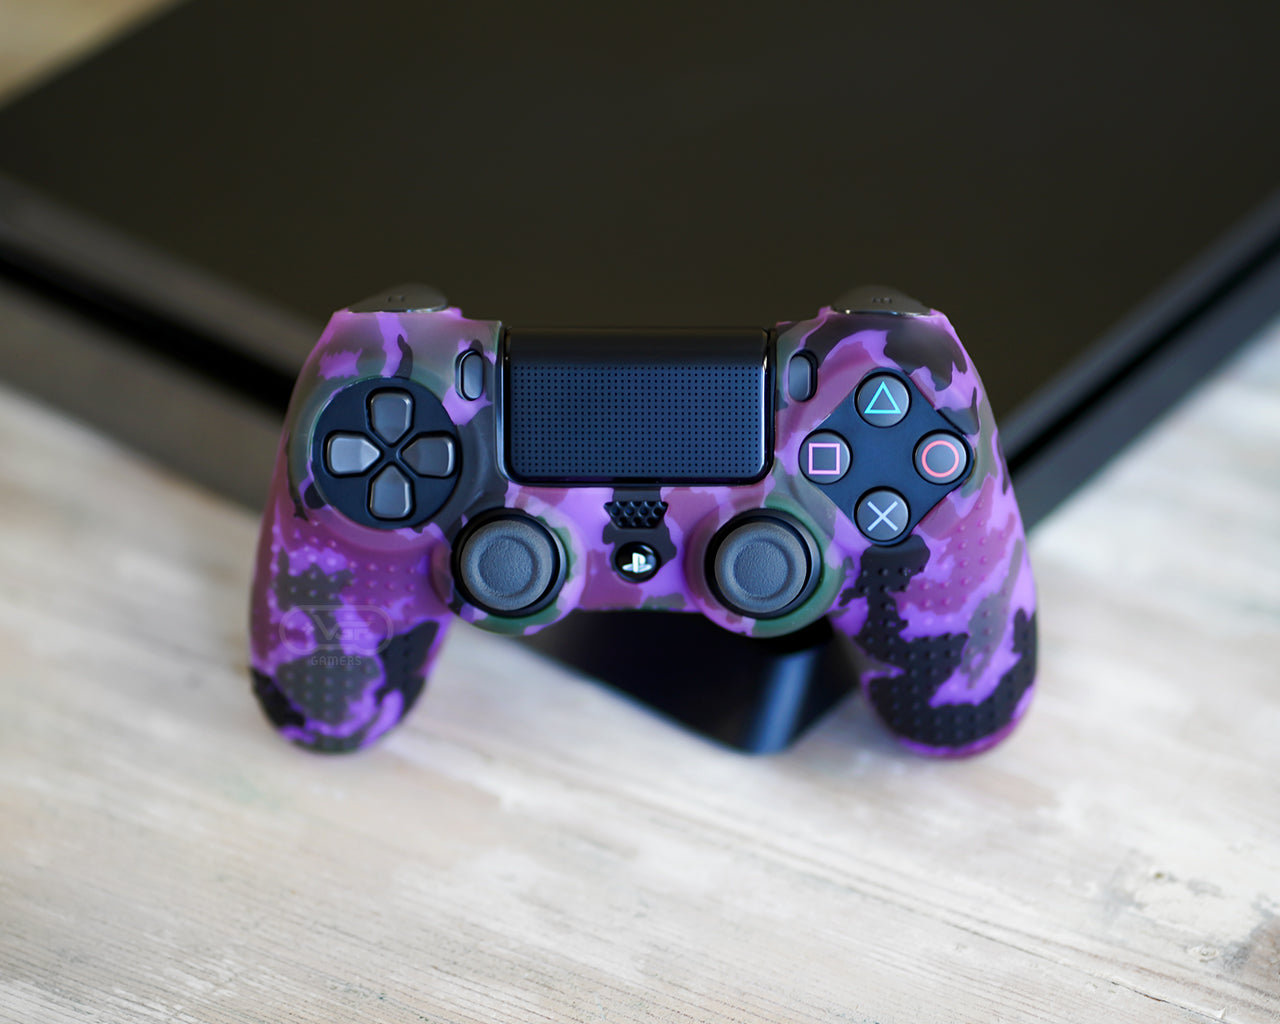 blue and purple ps4 controller